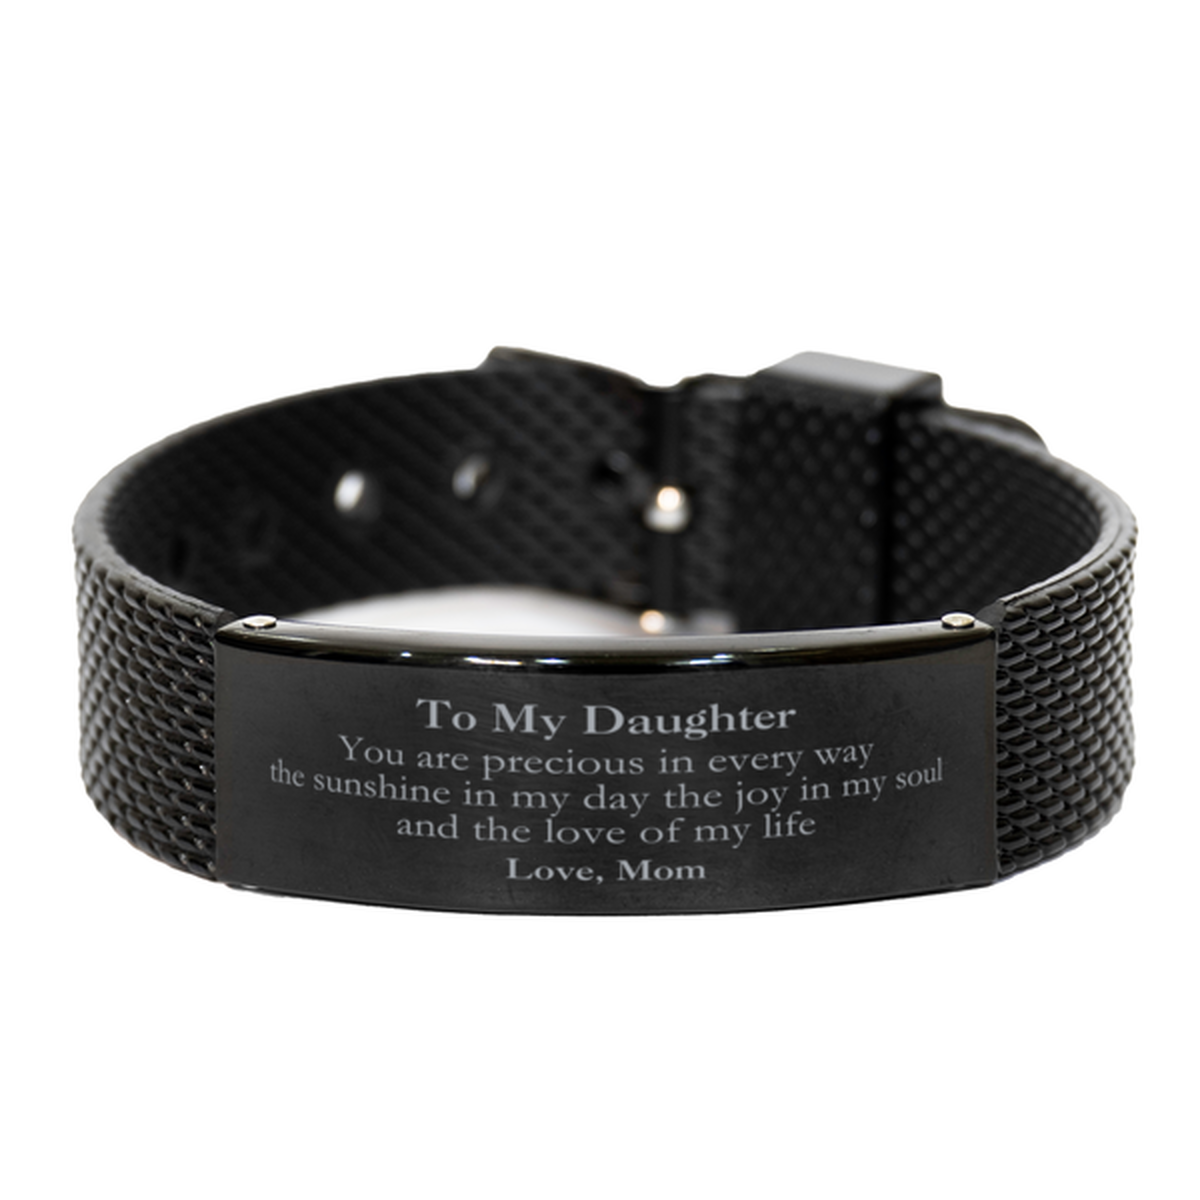 Graduation Gifts for Daughter Black Shark Mesh Bracelet Present from Mom, Christmas Daughter Birthday Gifts Daughter You are precious in every way the sunshine in my day. Love, Mom